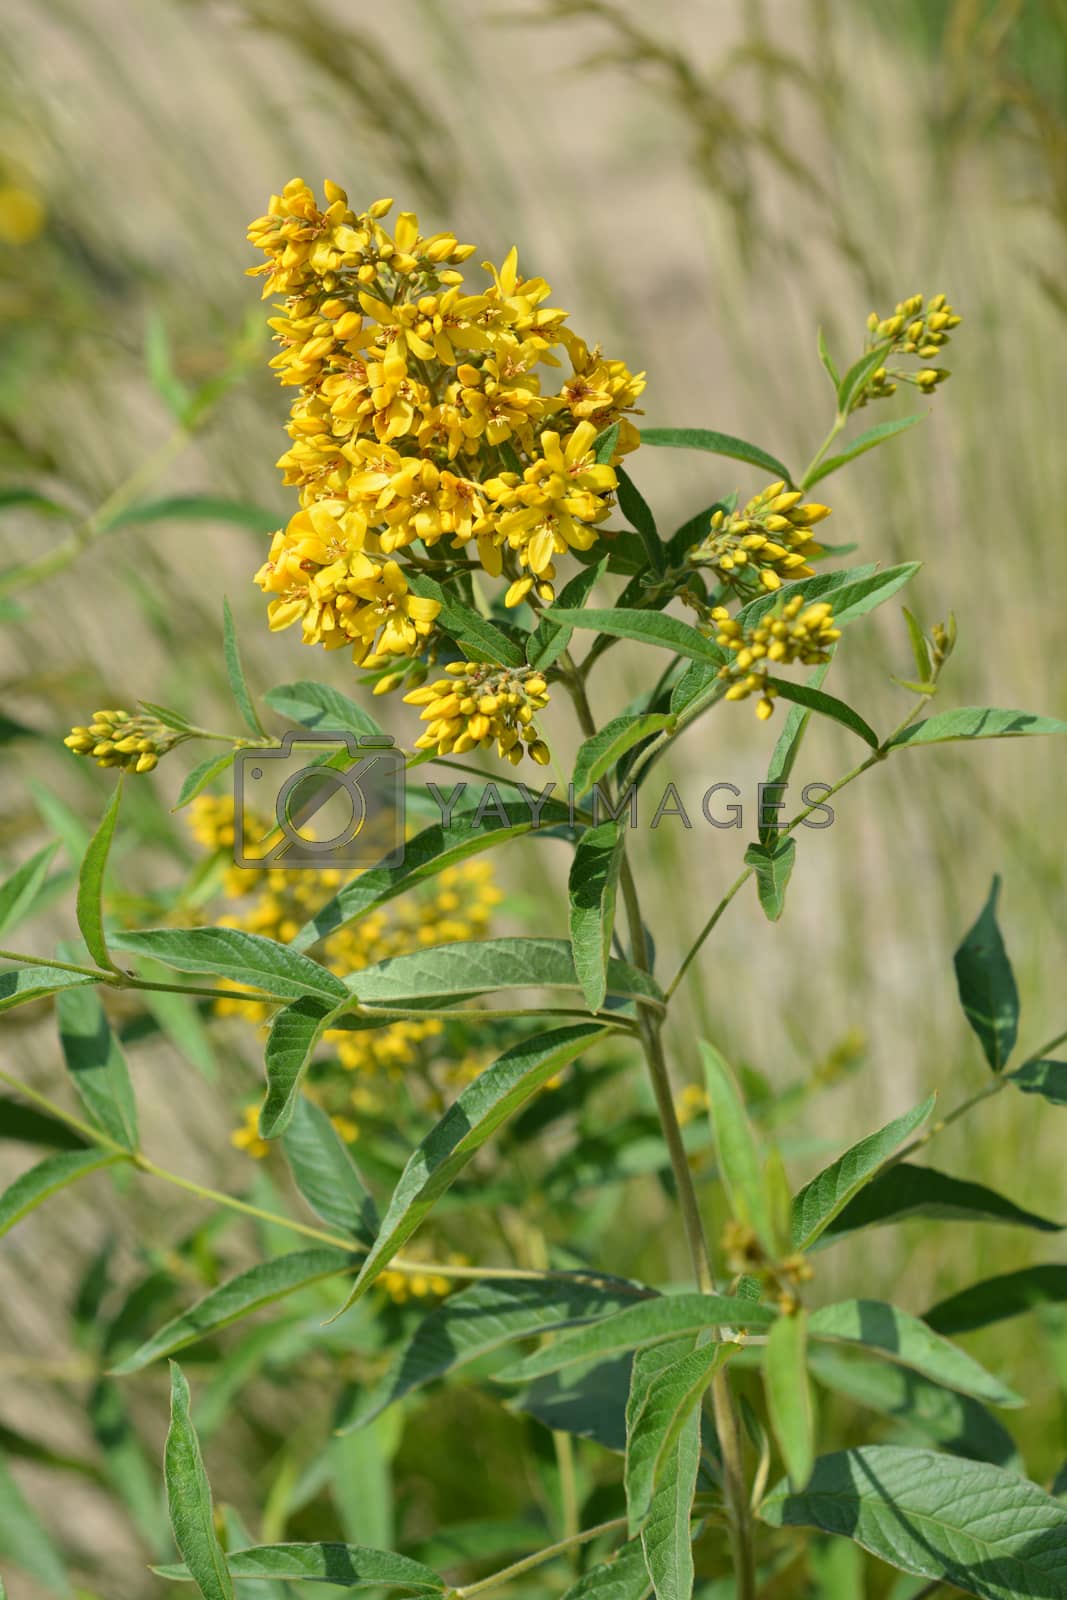 Royalty free image of Garden loosestrife by nahhan